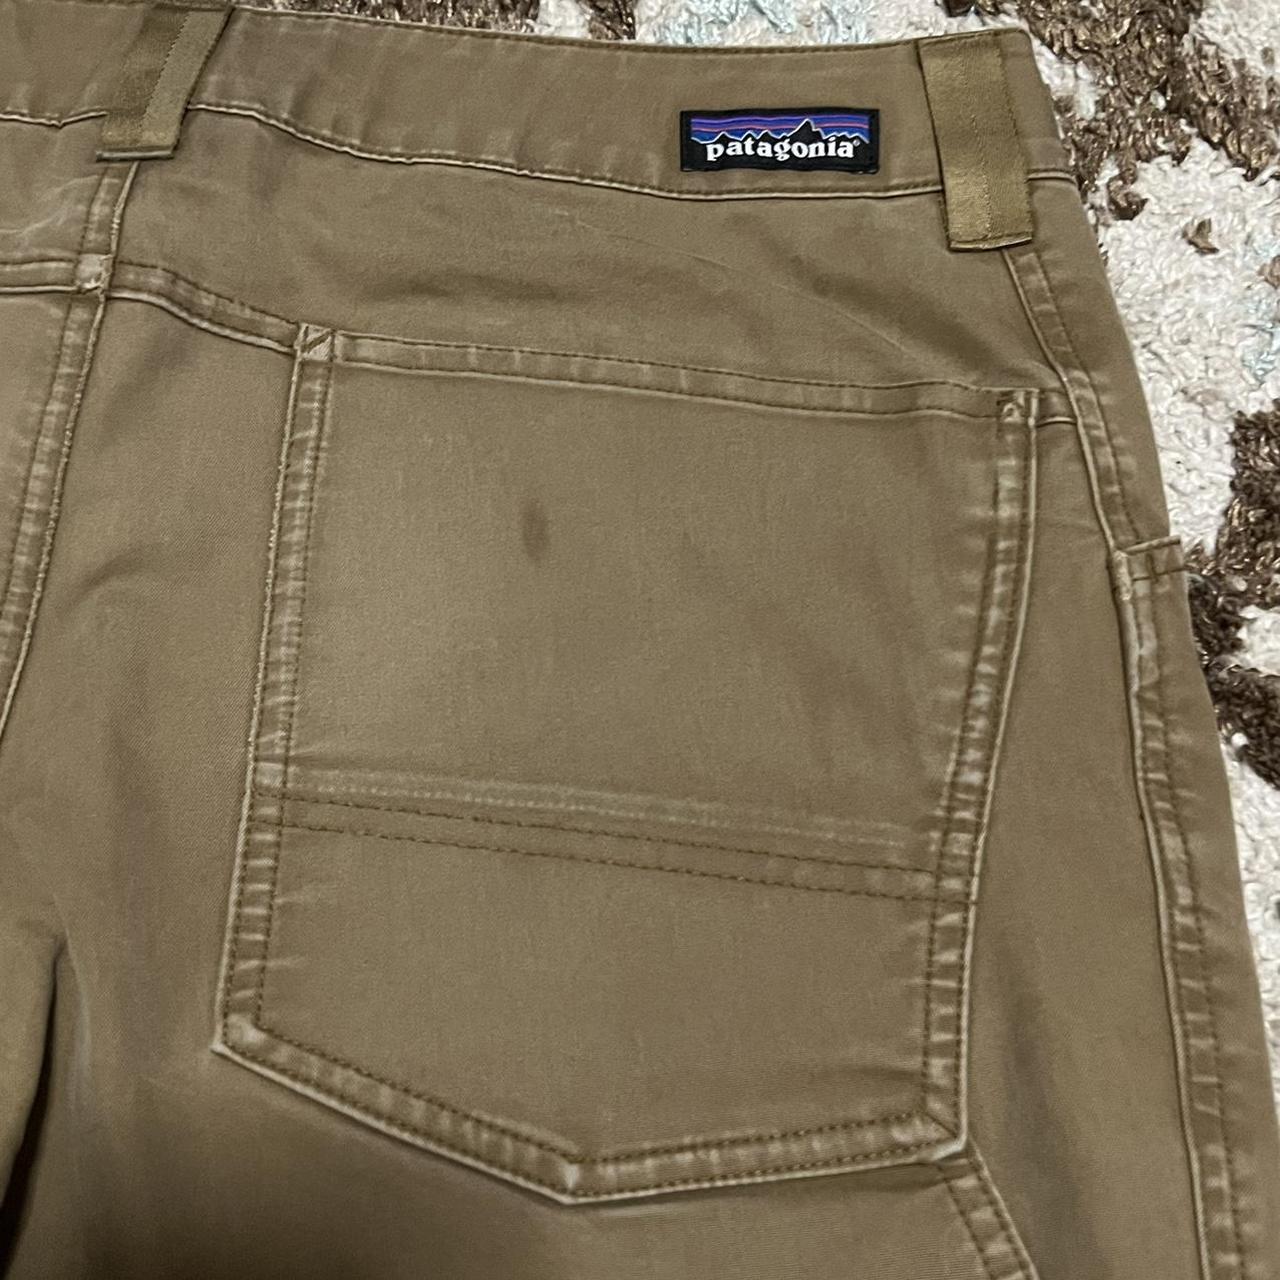 Gritstone Rock Pants - Men's from Patagonia